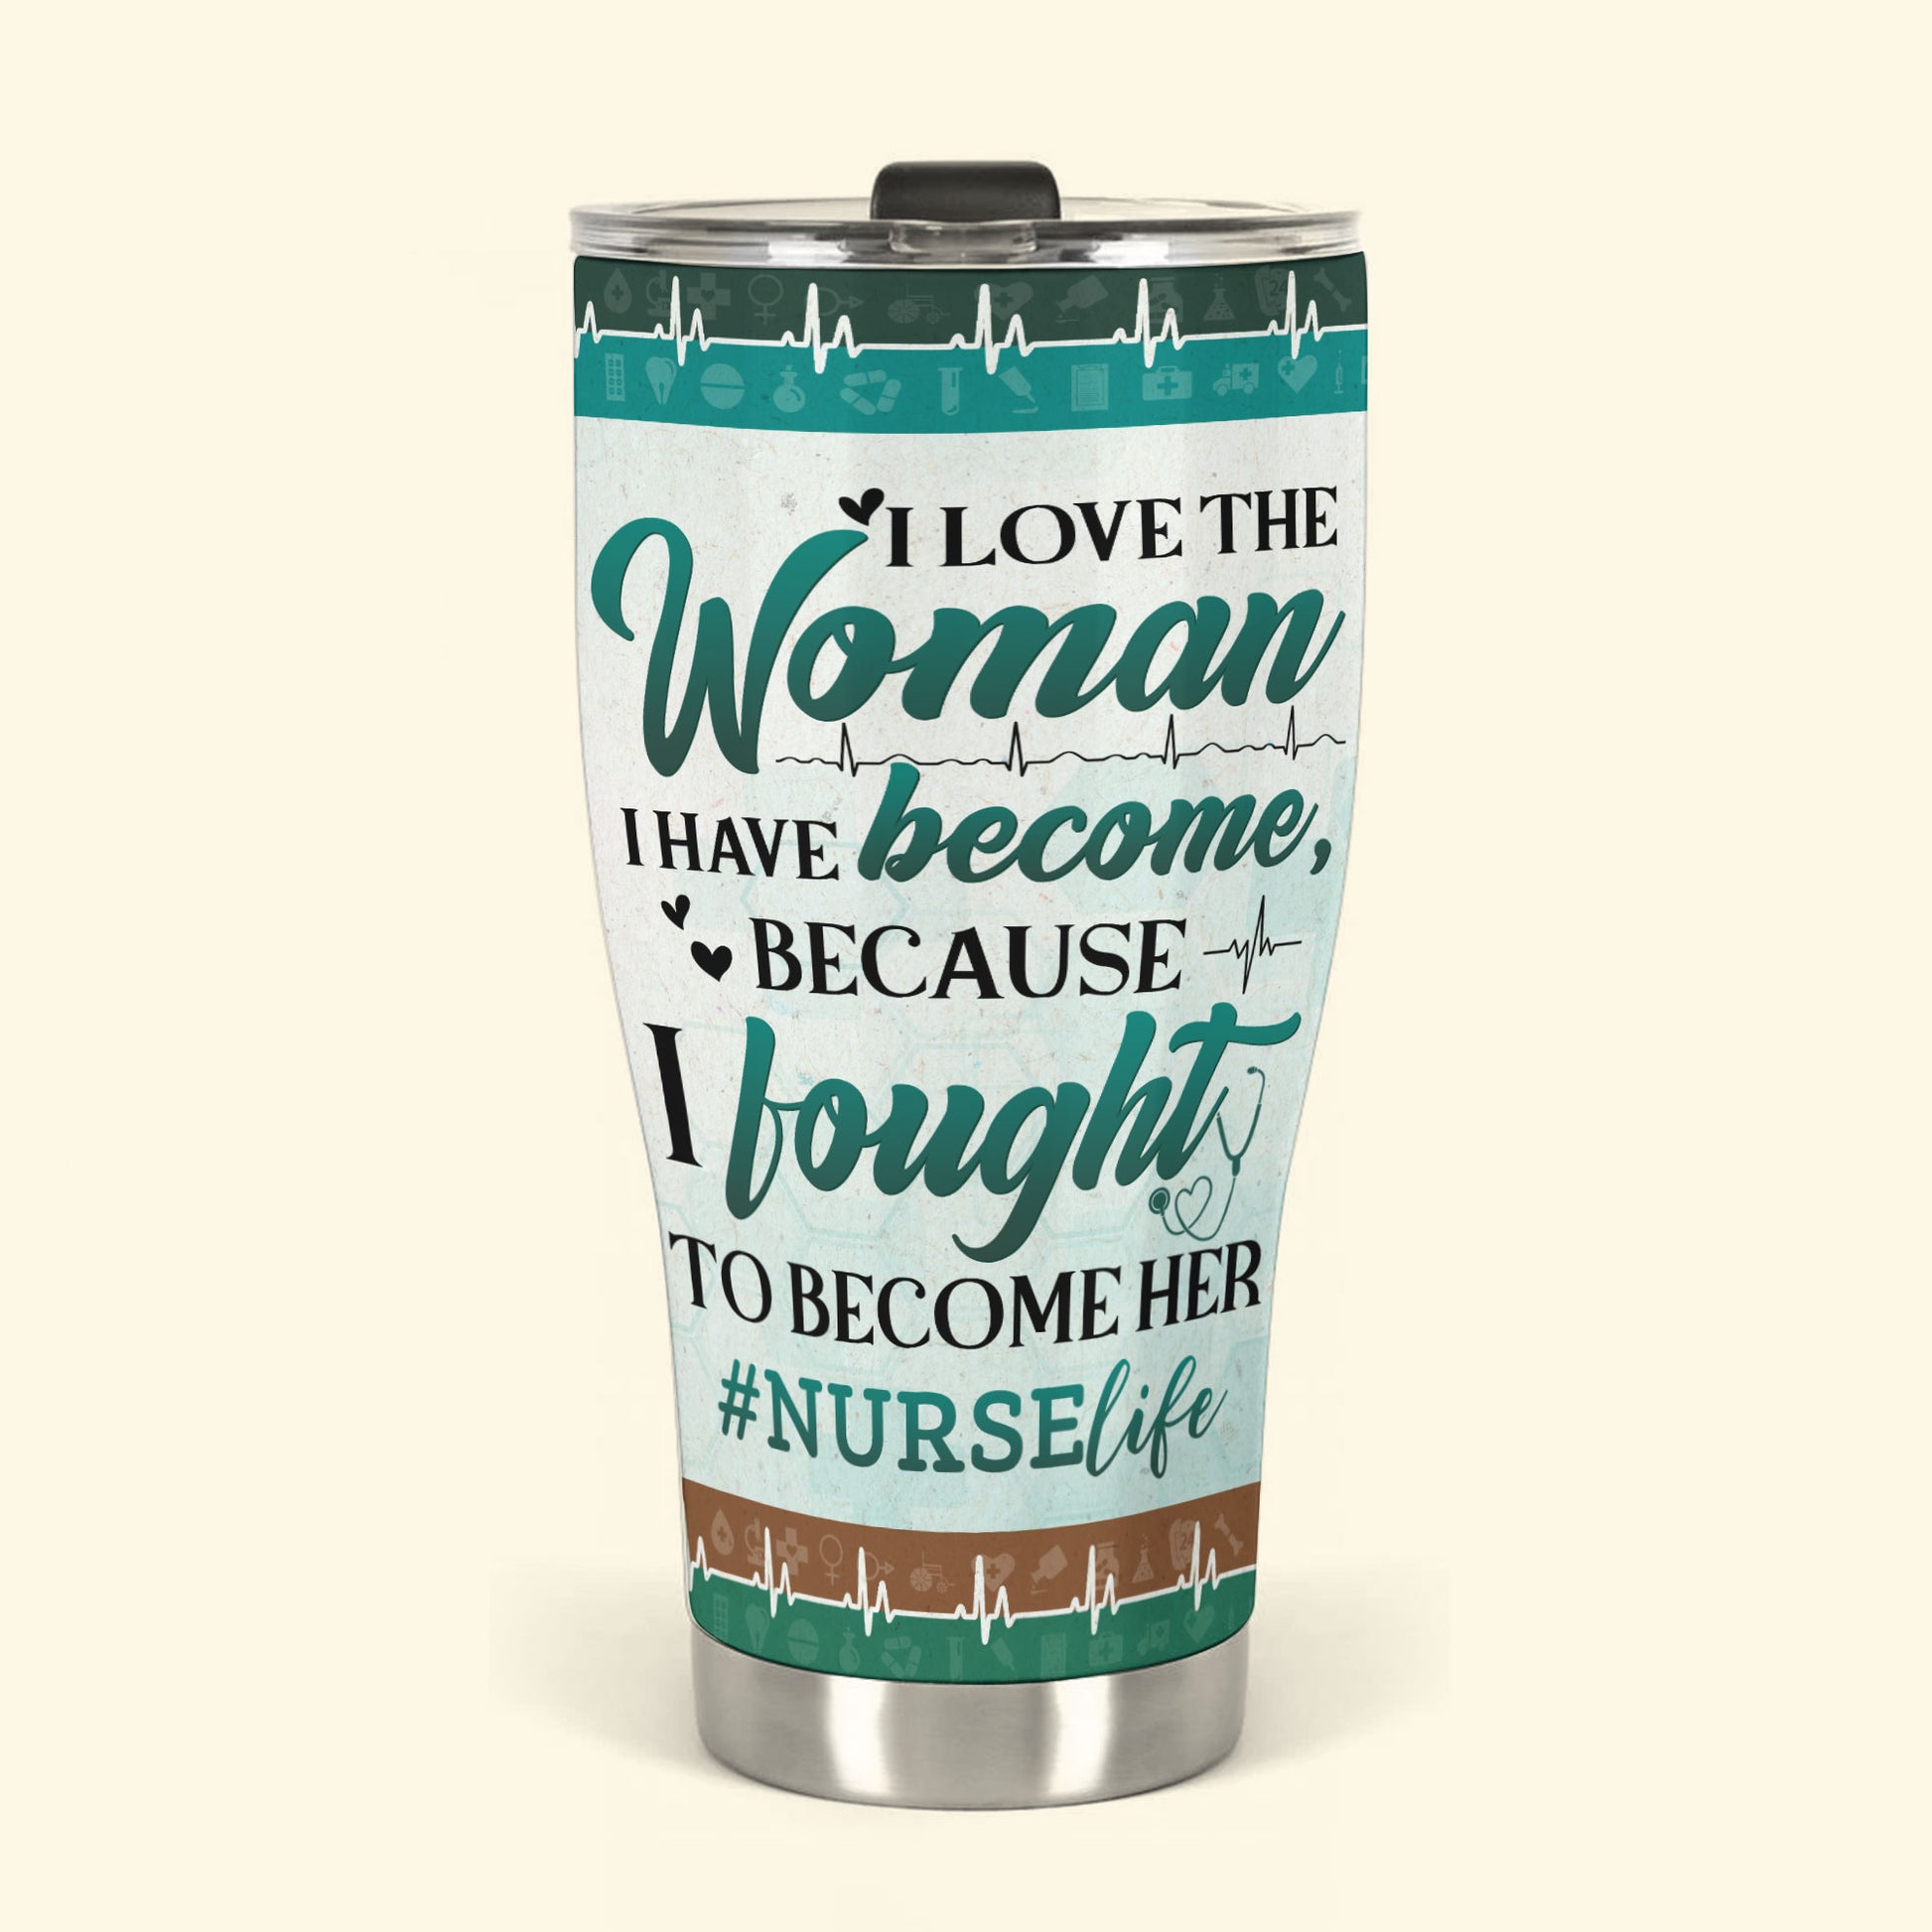 I Fought To Become Her - Personalized 30oz Curved Tumbler - Encourage Gift For Nurses, Doctors, Medical Staff, Colleagues, Co-workers